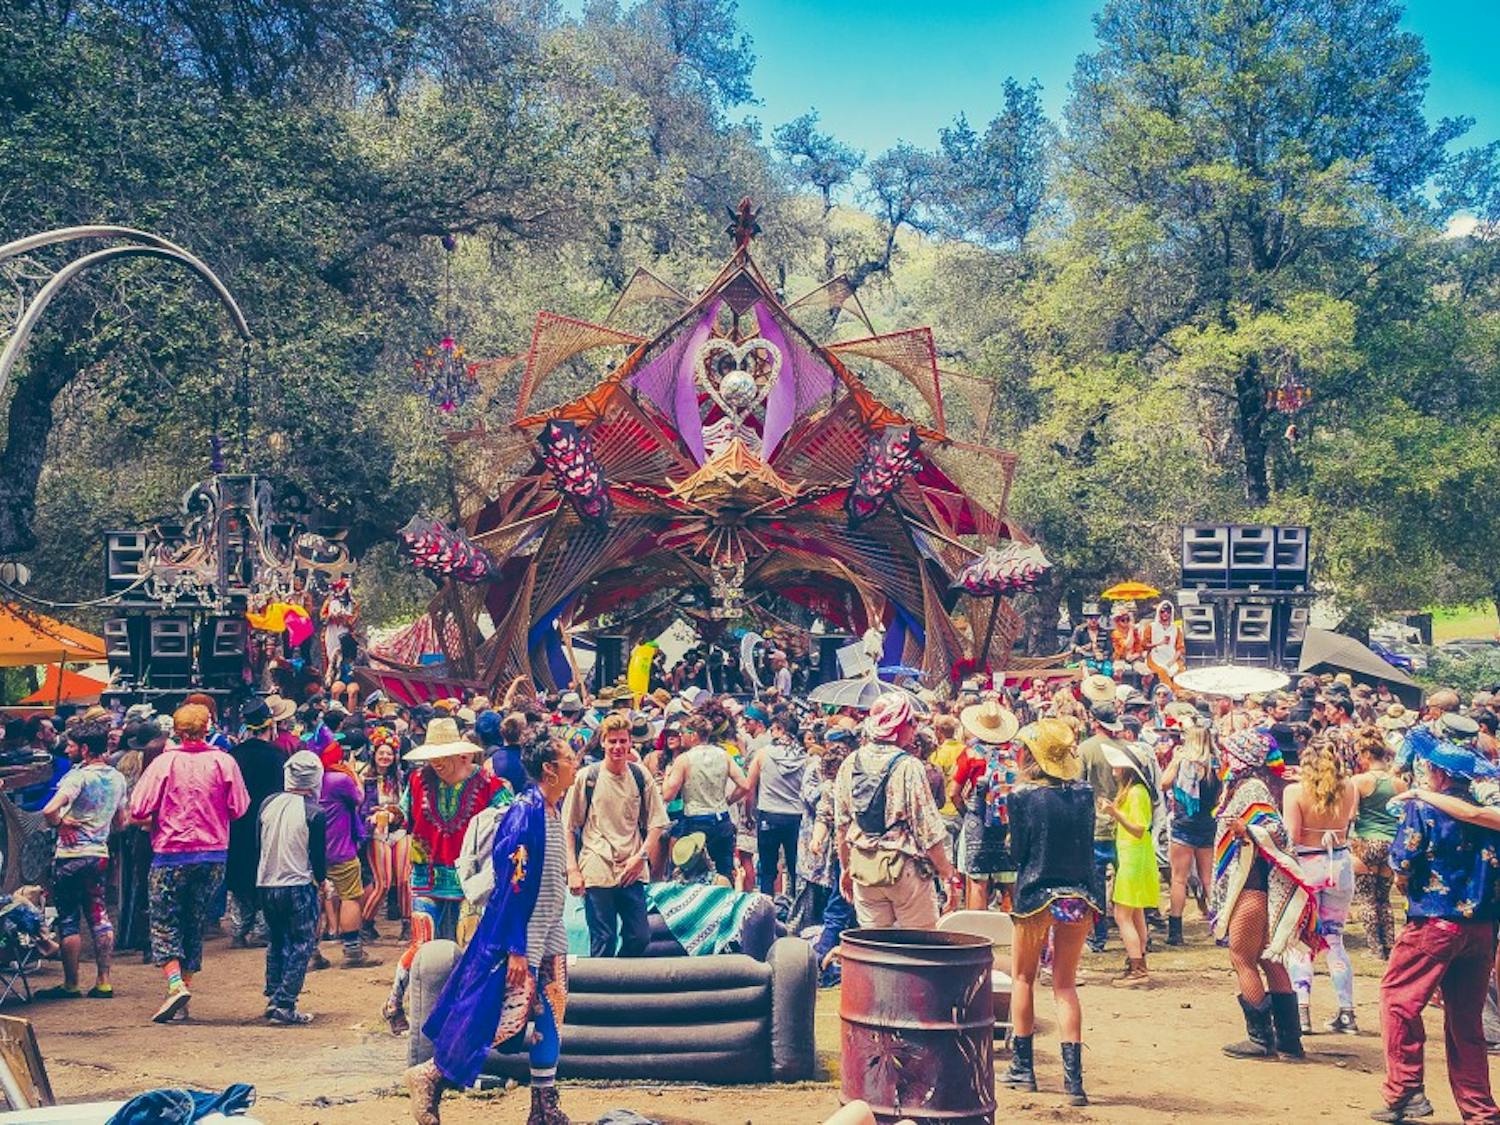 The mainstage during the day at Desert Hearts Music Festival 2017 in Los Cototes Indian Reservation, California.